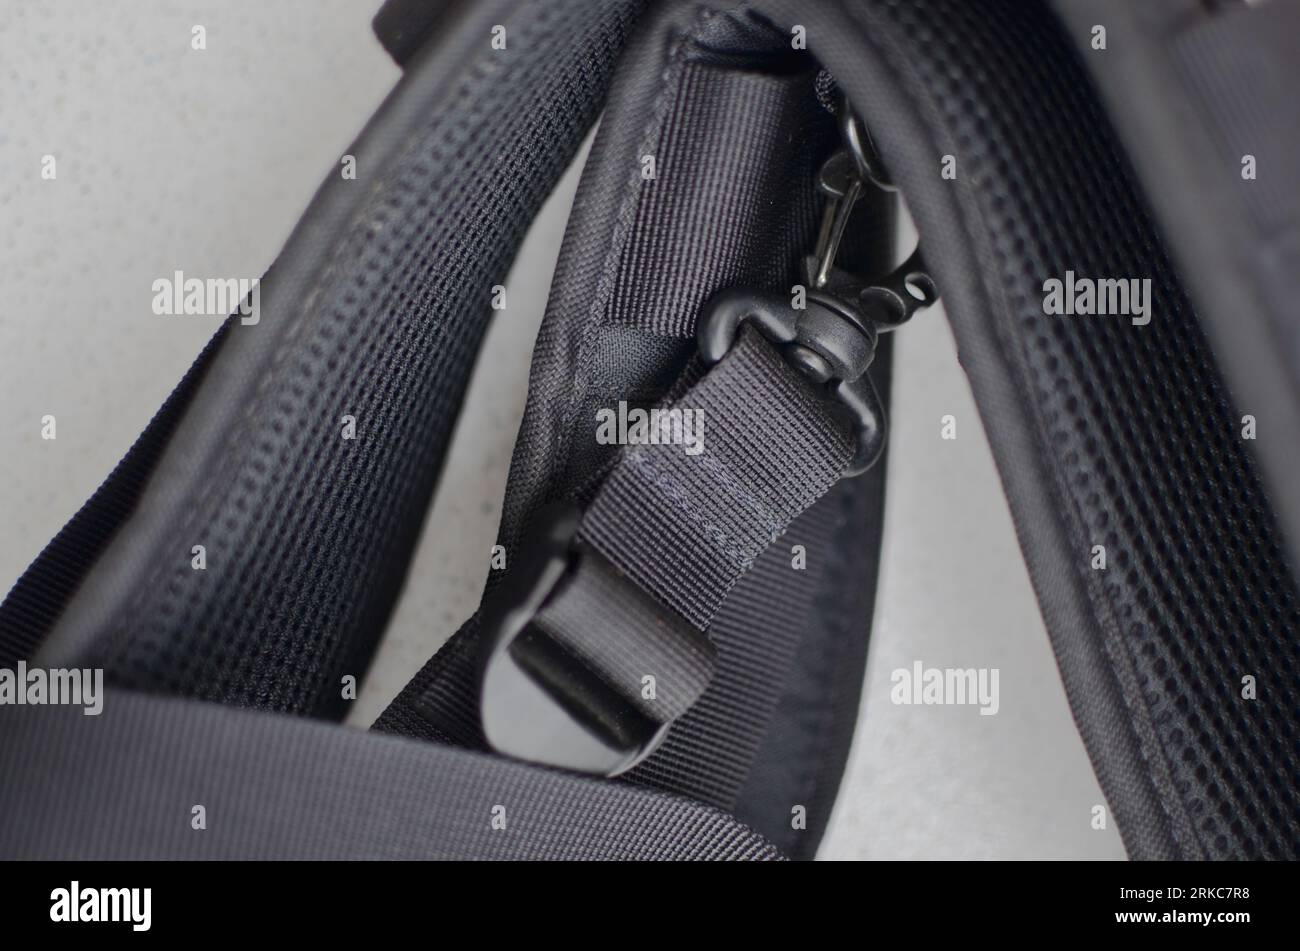 Black suspender or belt close-up, elegant and high-quality accessory to complete your style. Concept for backpacks or military accessories. Stock Photo